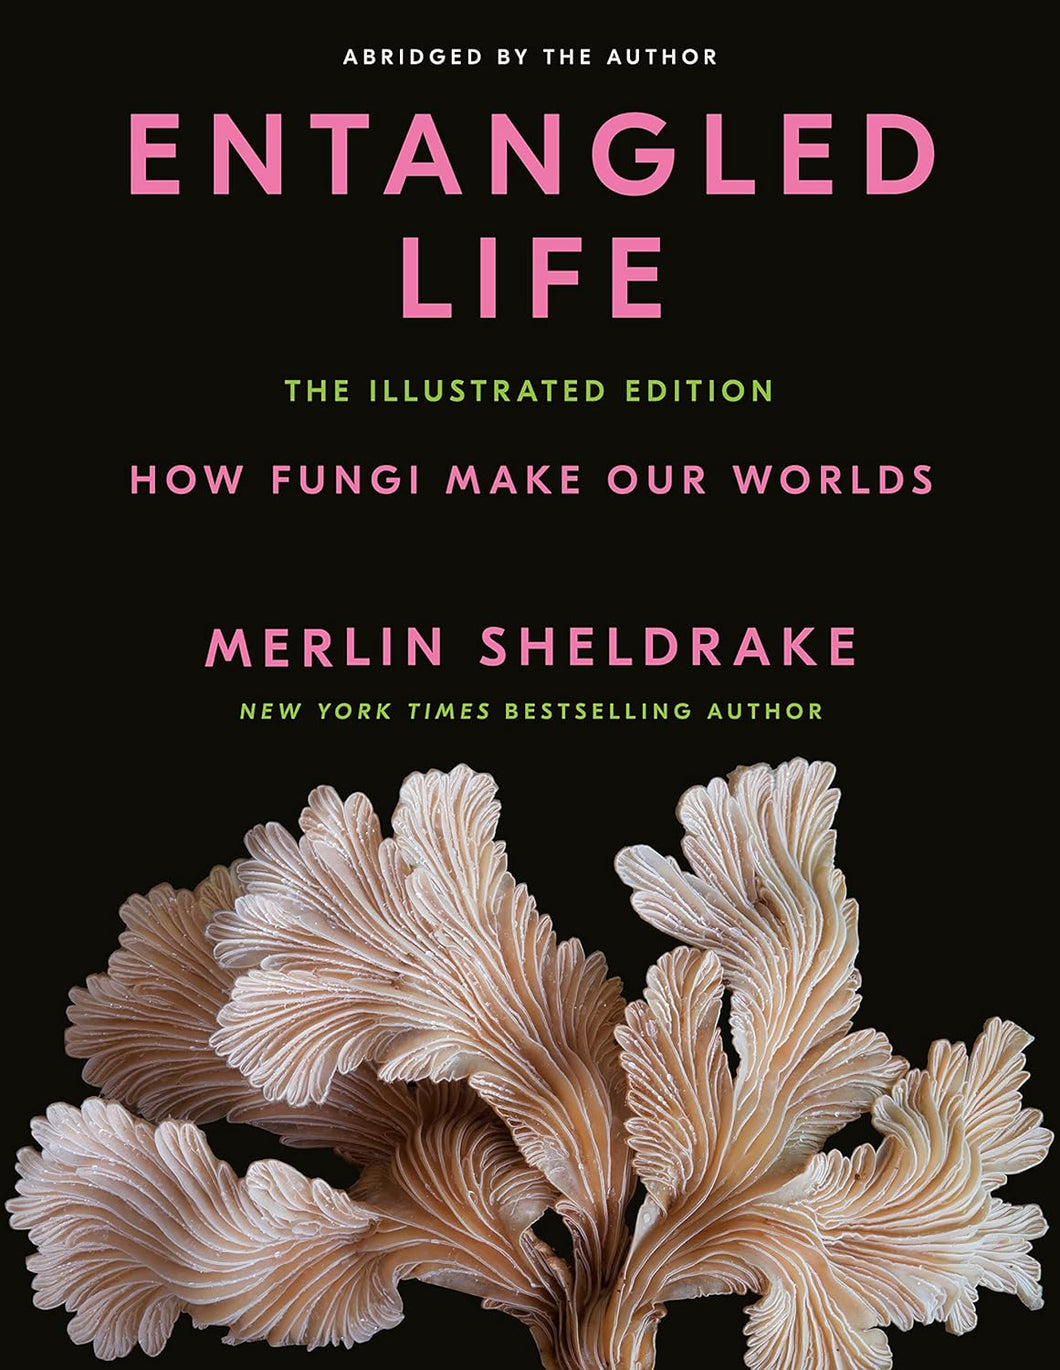 Entangled Life: The Illustrated Edition: How Fungi Make Our Worlds [Merlin Sheldrake]